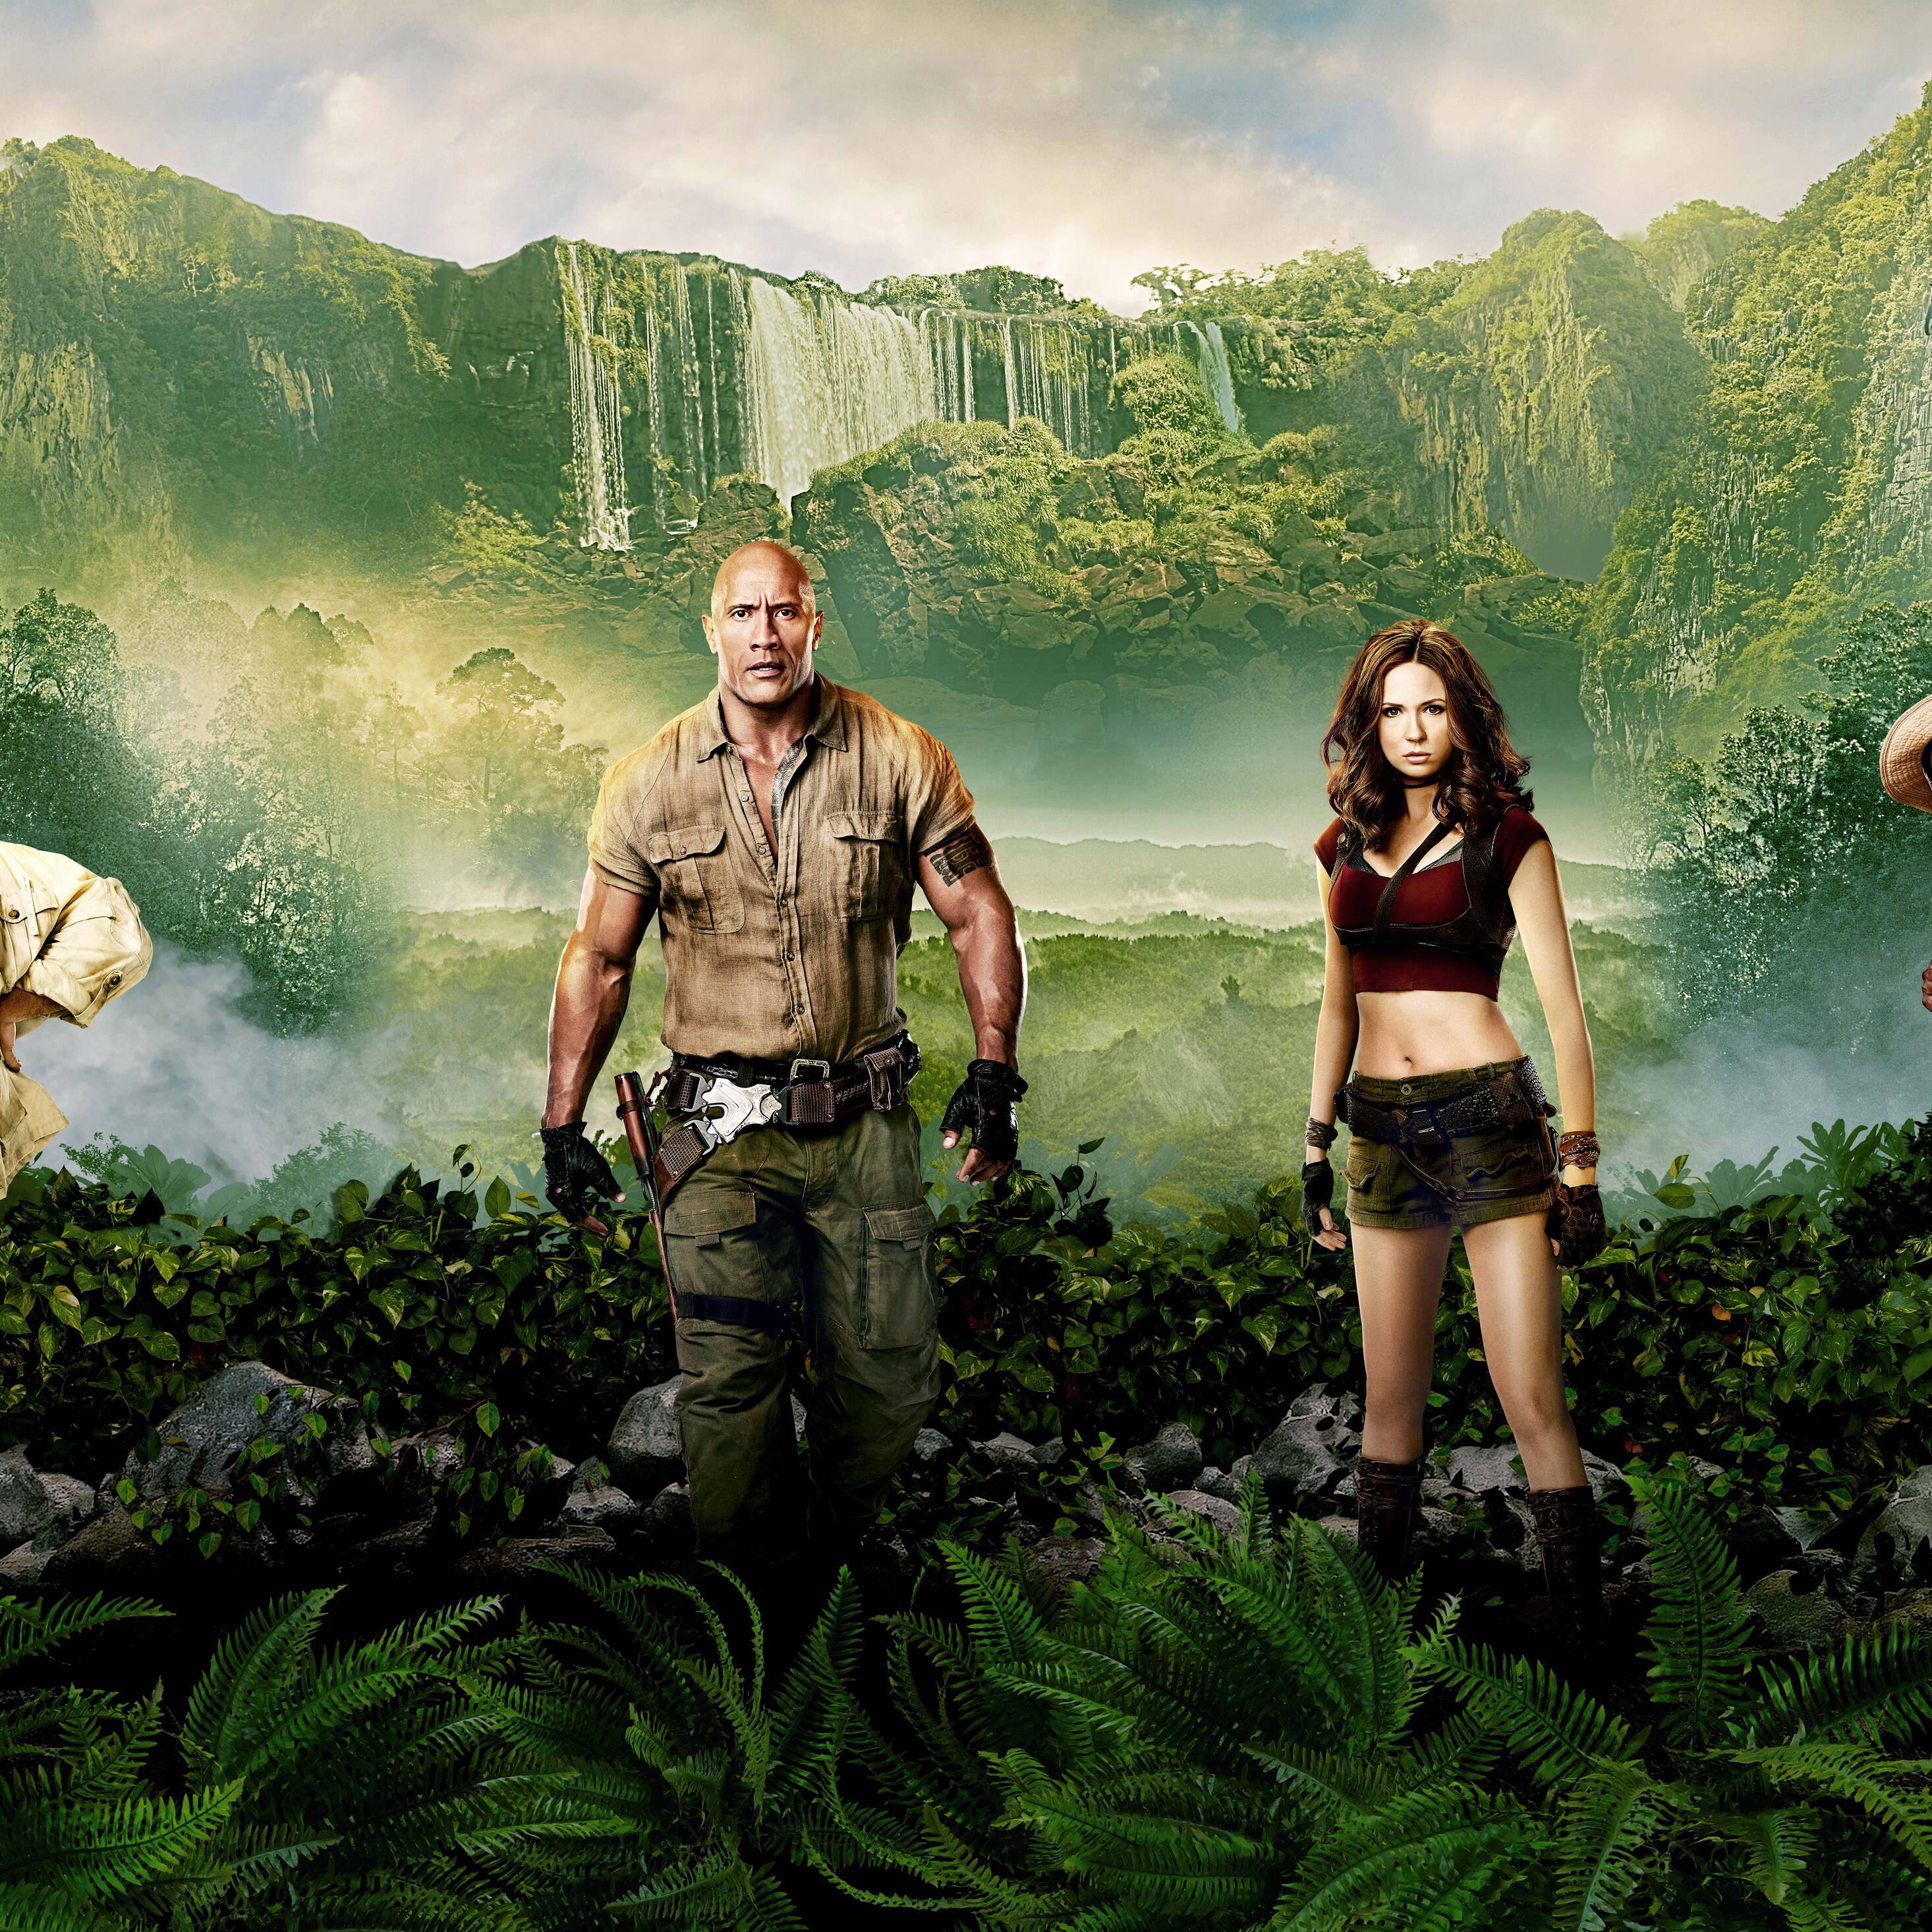 4k-wallpapers. jumanji-welcome-to-the-jungle-wallpapers. hd-wallpapers. 